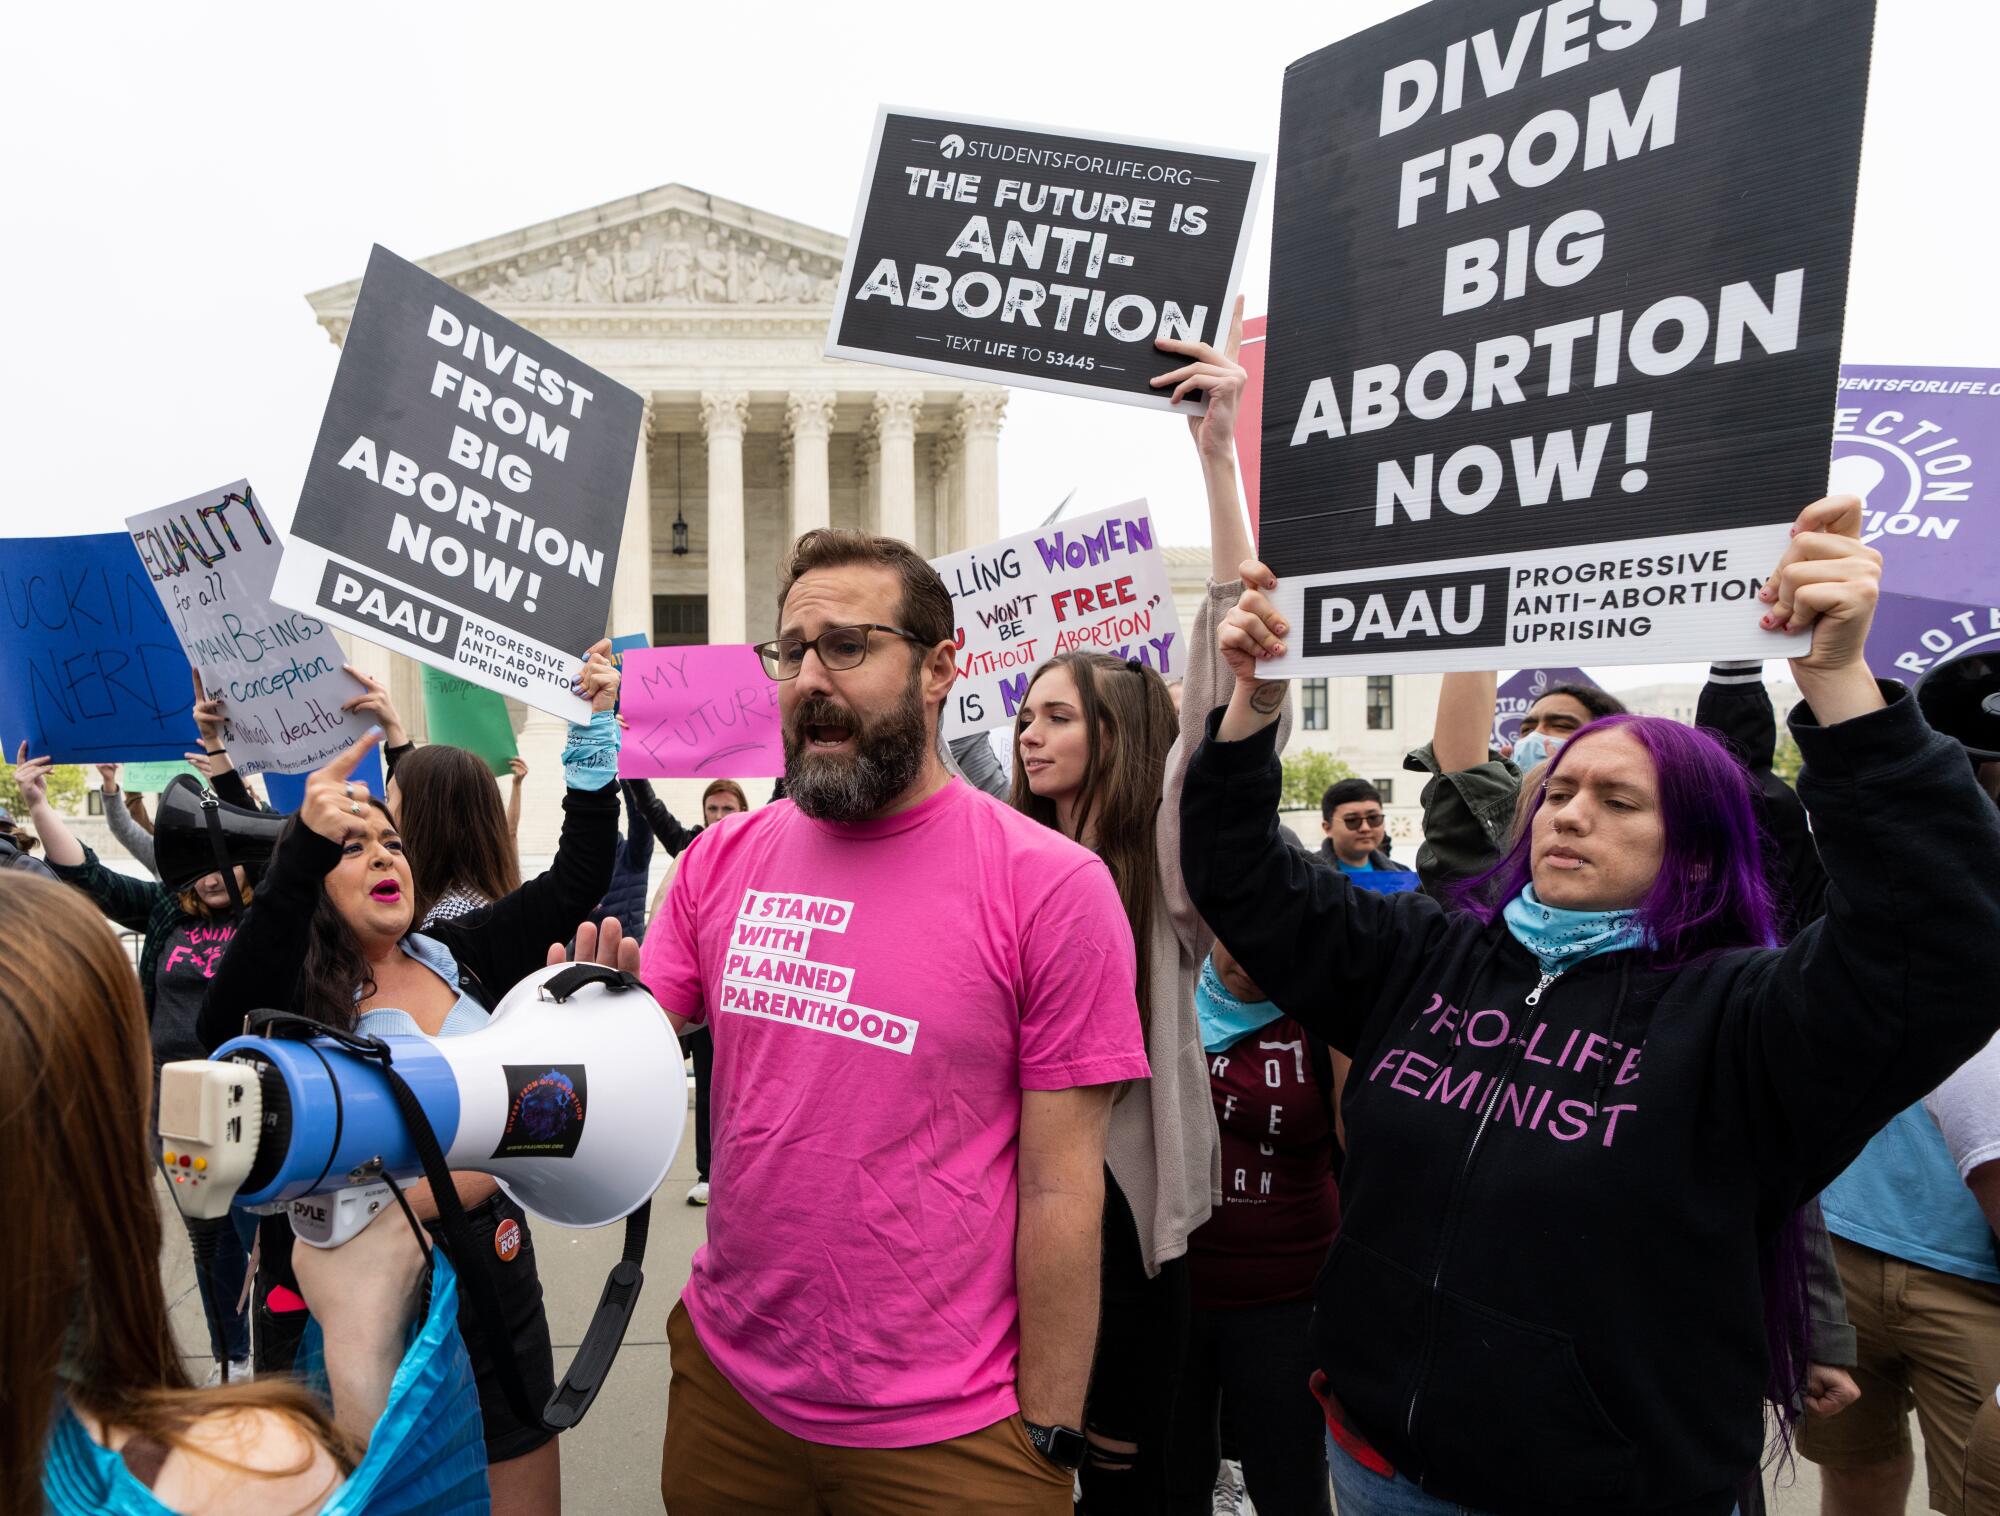 Antiabortion activists with "Divest from Big Abortion now!" signs surround a man in a Planned Parenthood shirt.